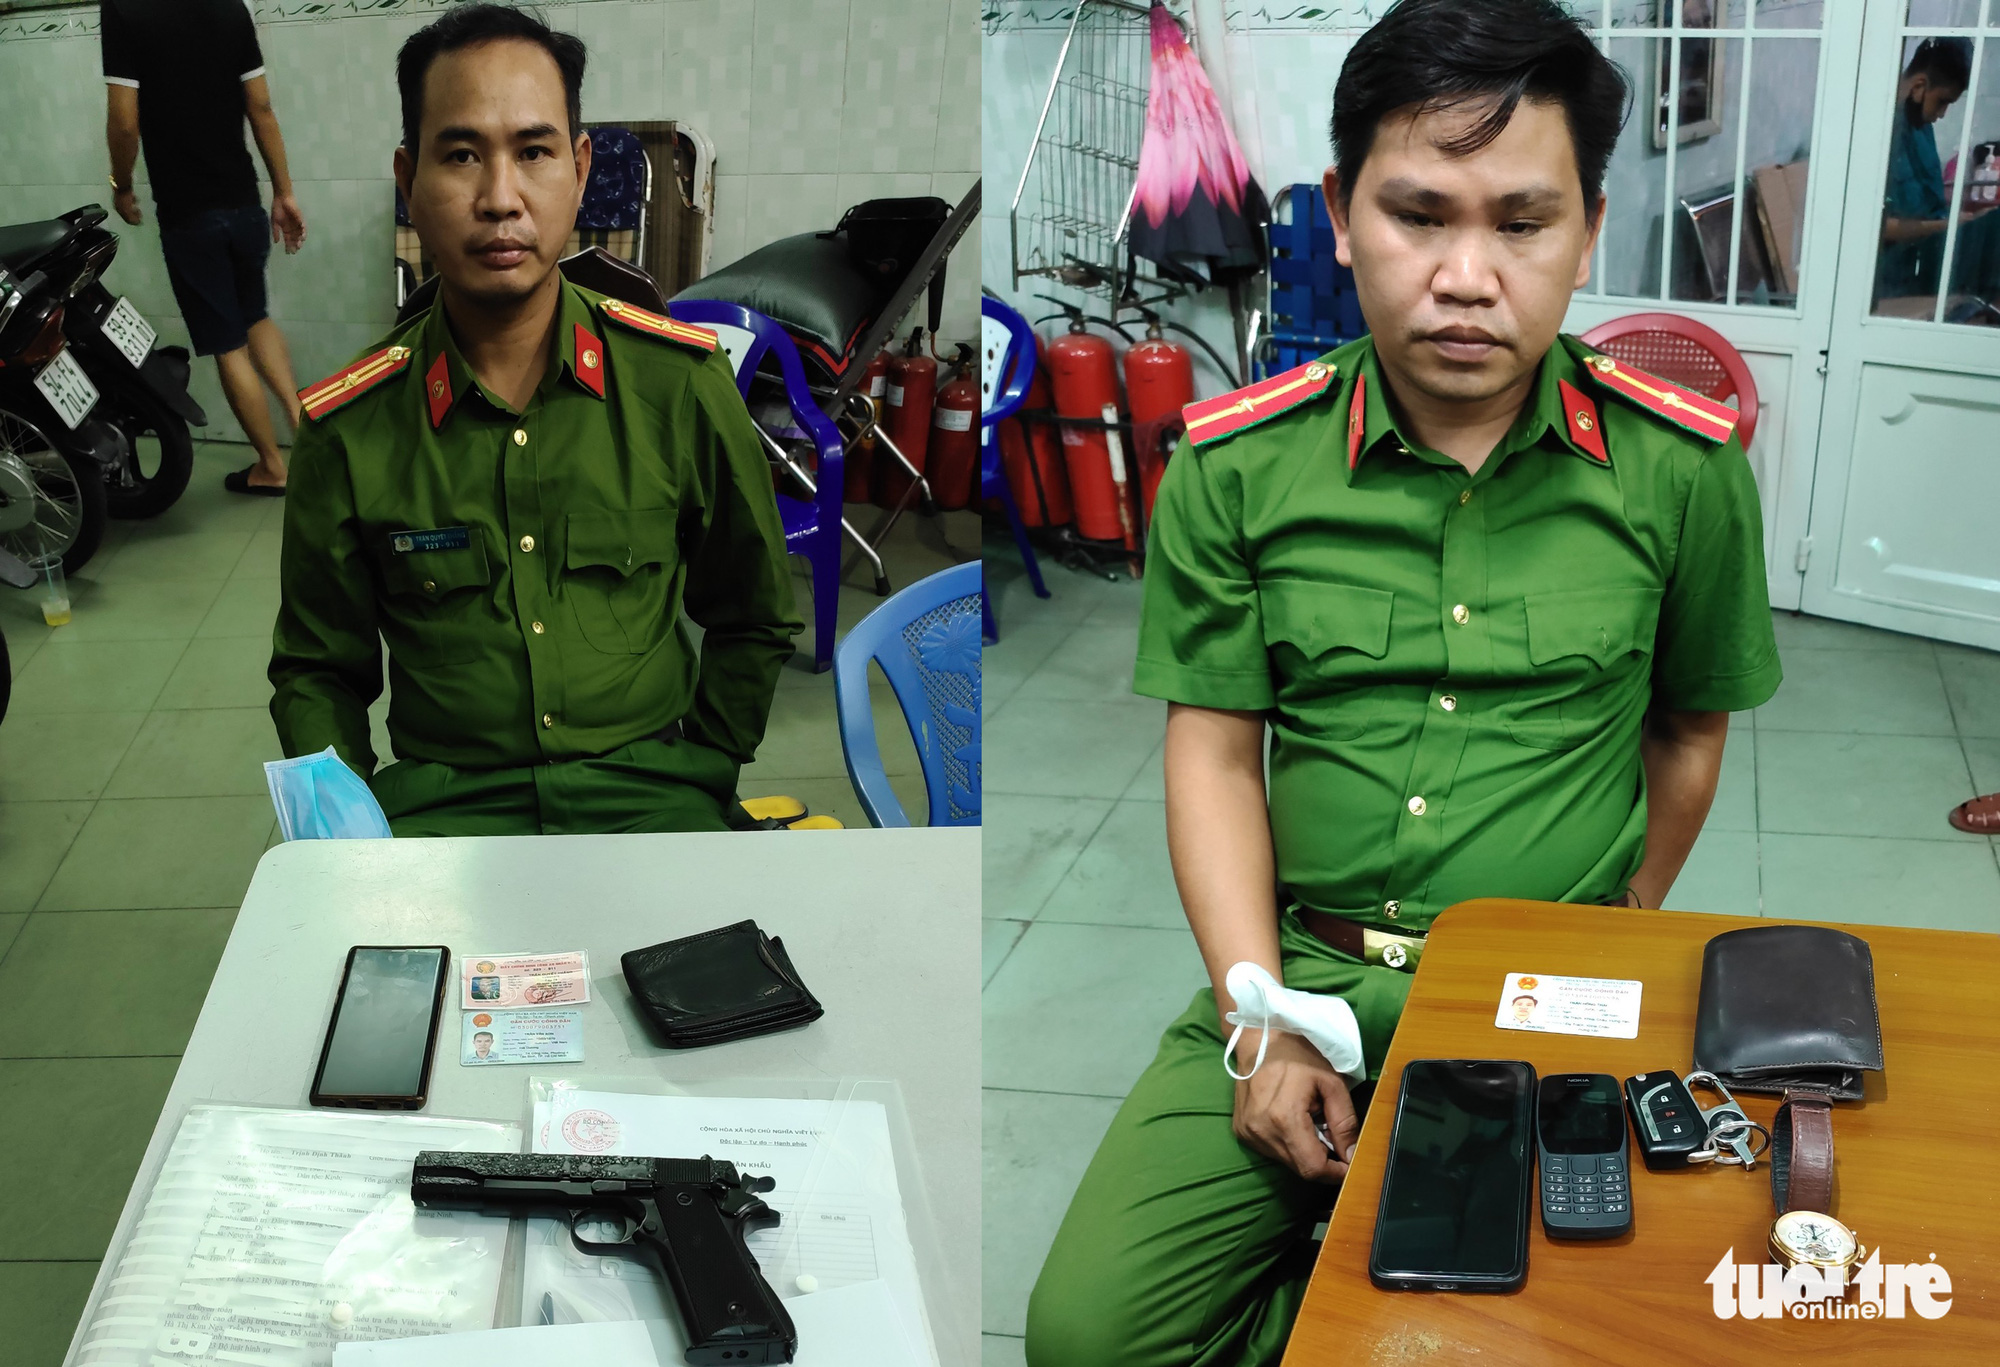 Men impersonate police to extort residents in Ho Chi Minh City